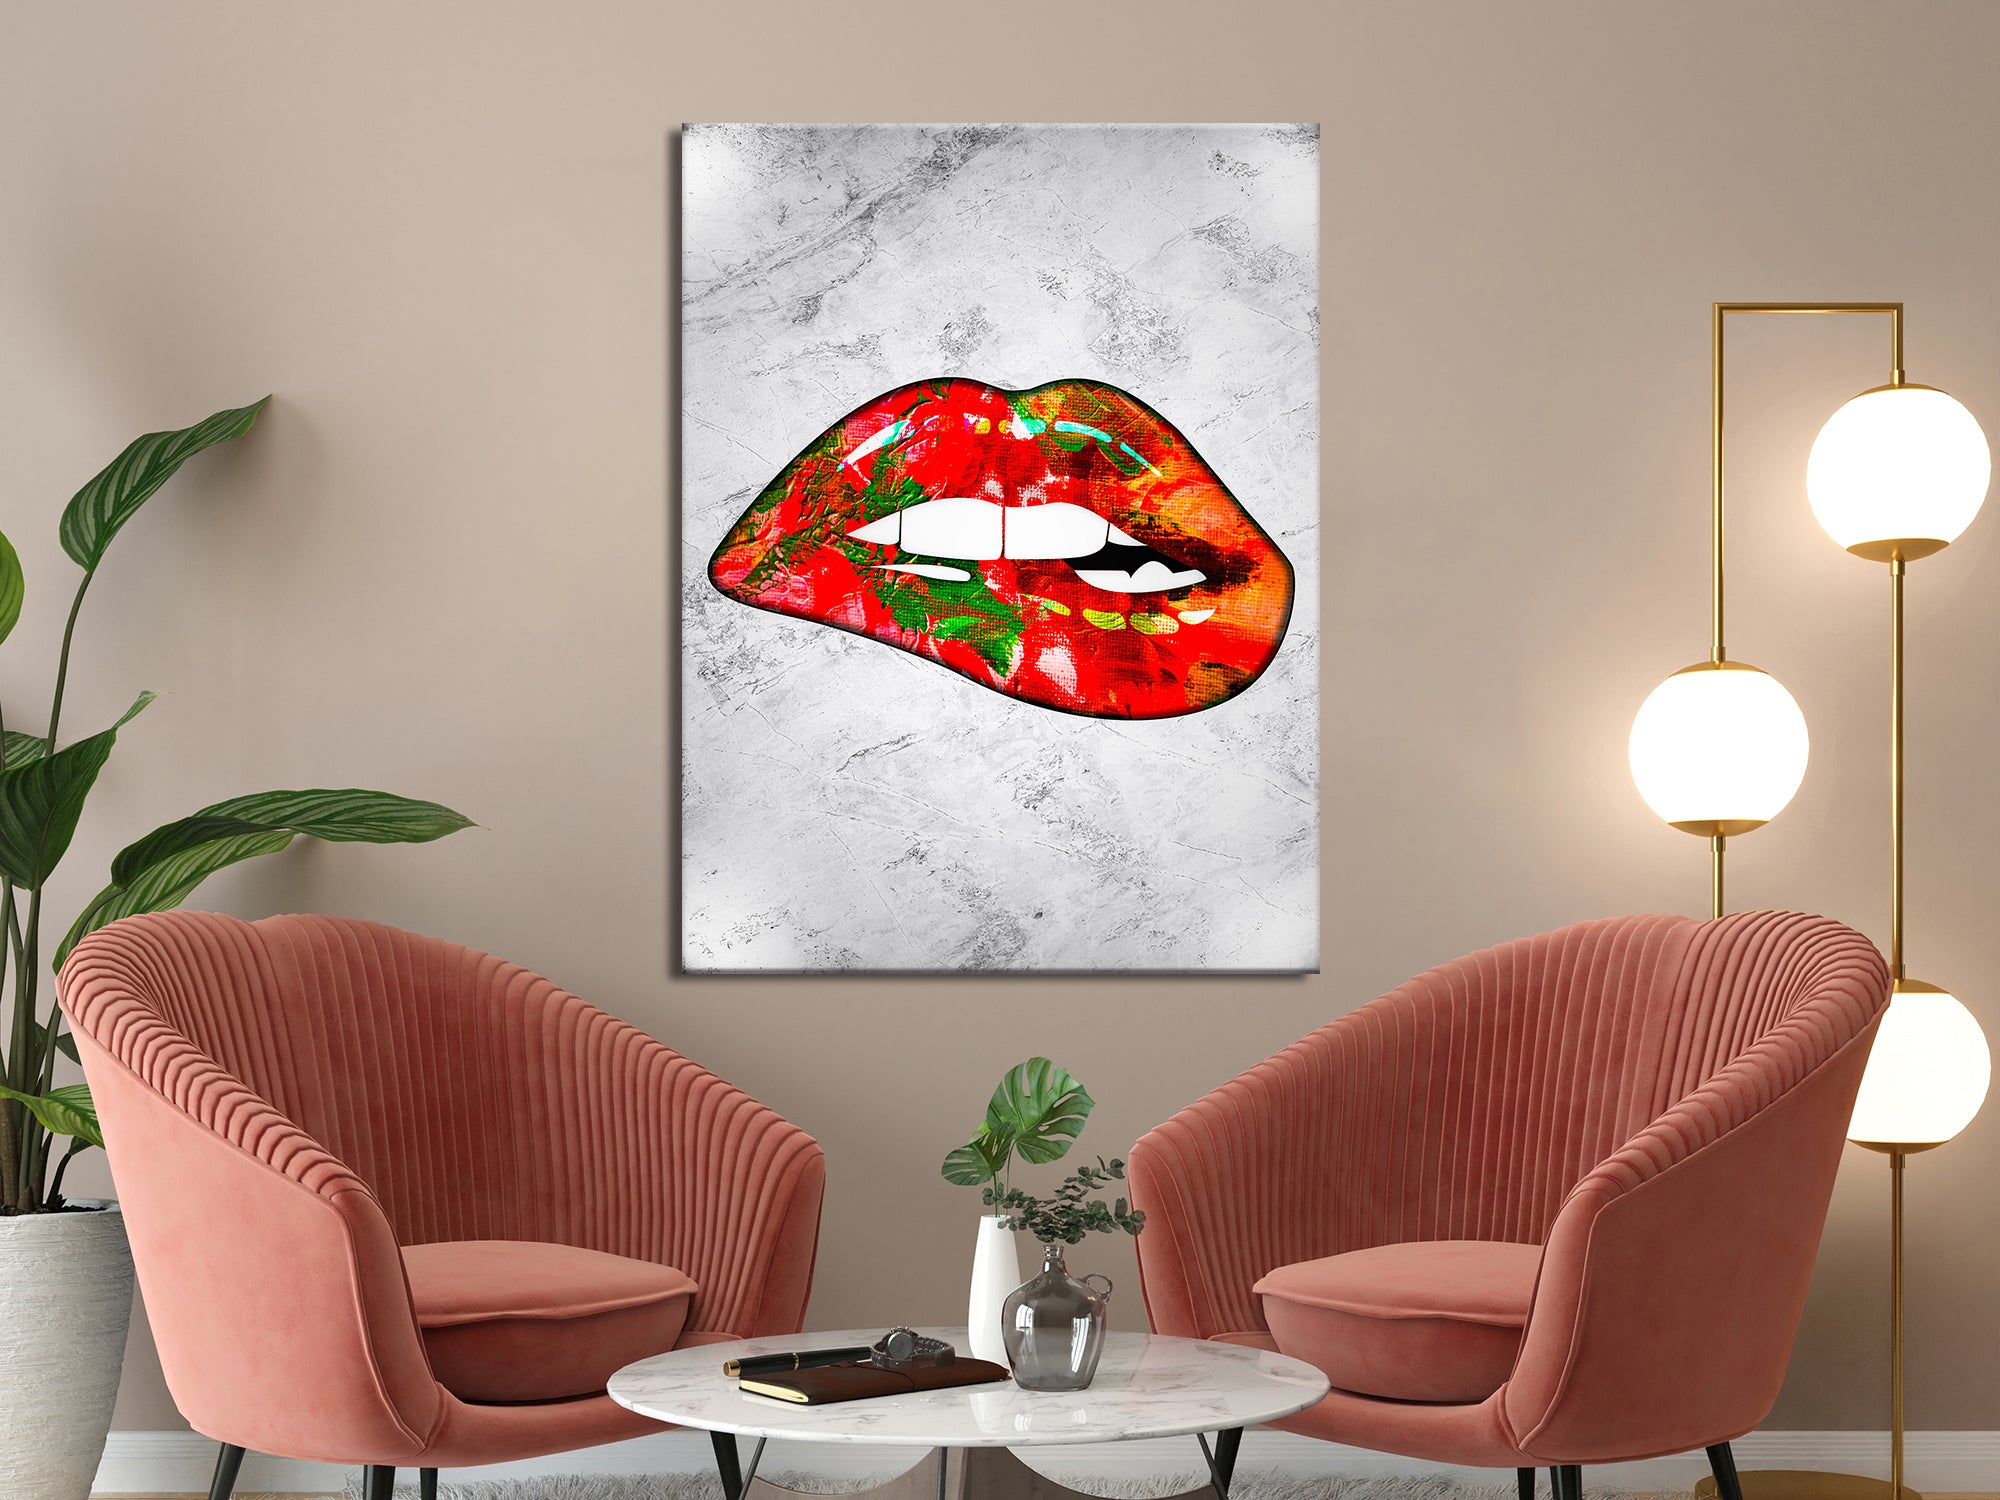  CanvasVilla GOLD LIPS CANVAS WALL ART - ABOVE COUCH WALL DECOR  Motivational Inspirational Quotes Canvas Print Wall Art Painting Decor for  Office, Home- 30X40 Black Frame - Ready To Hang: Posters